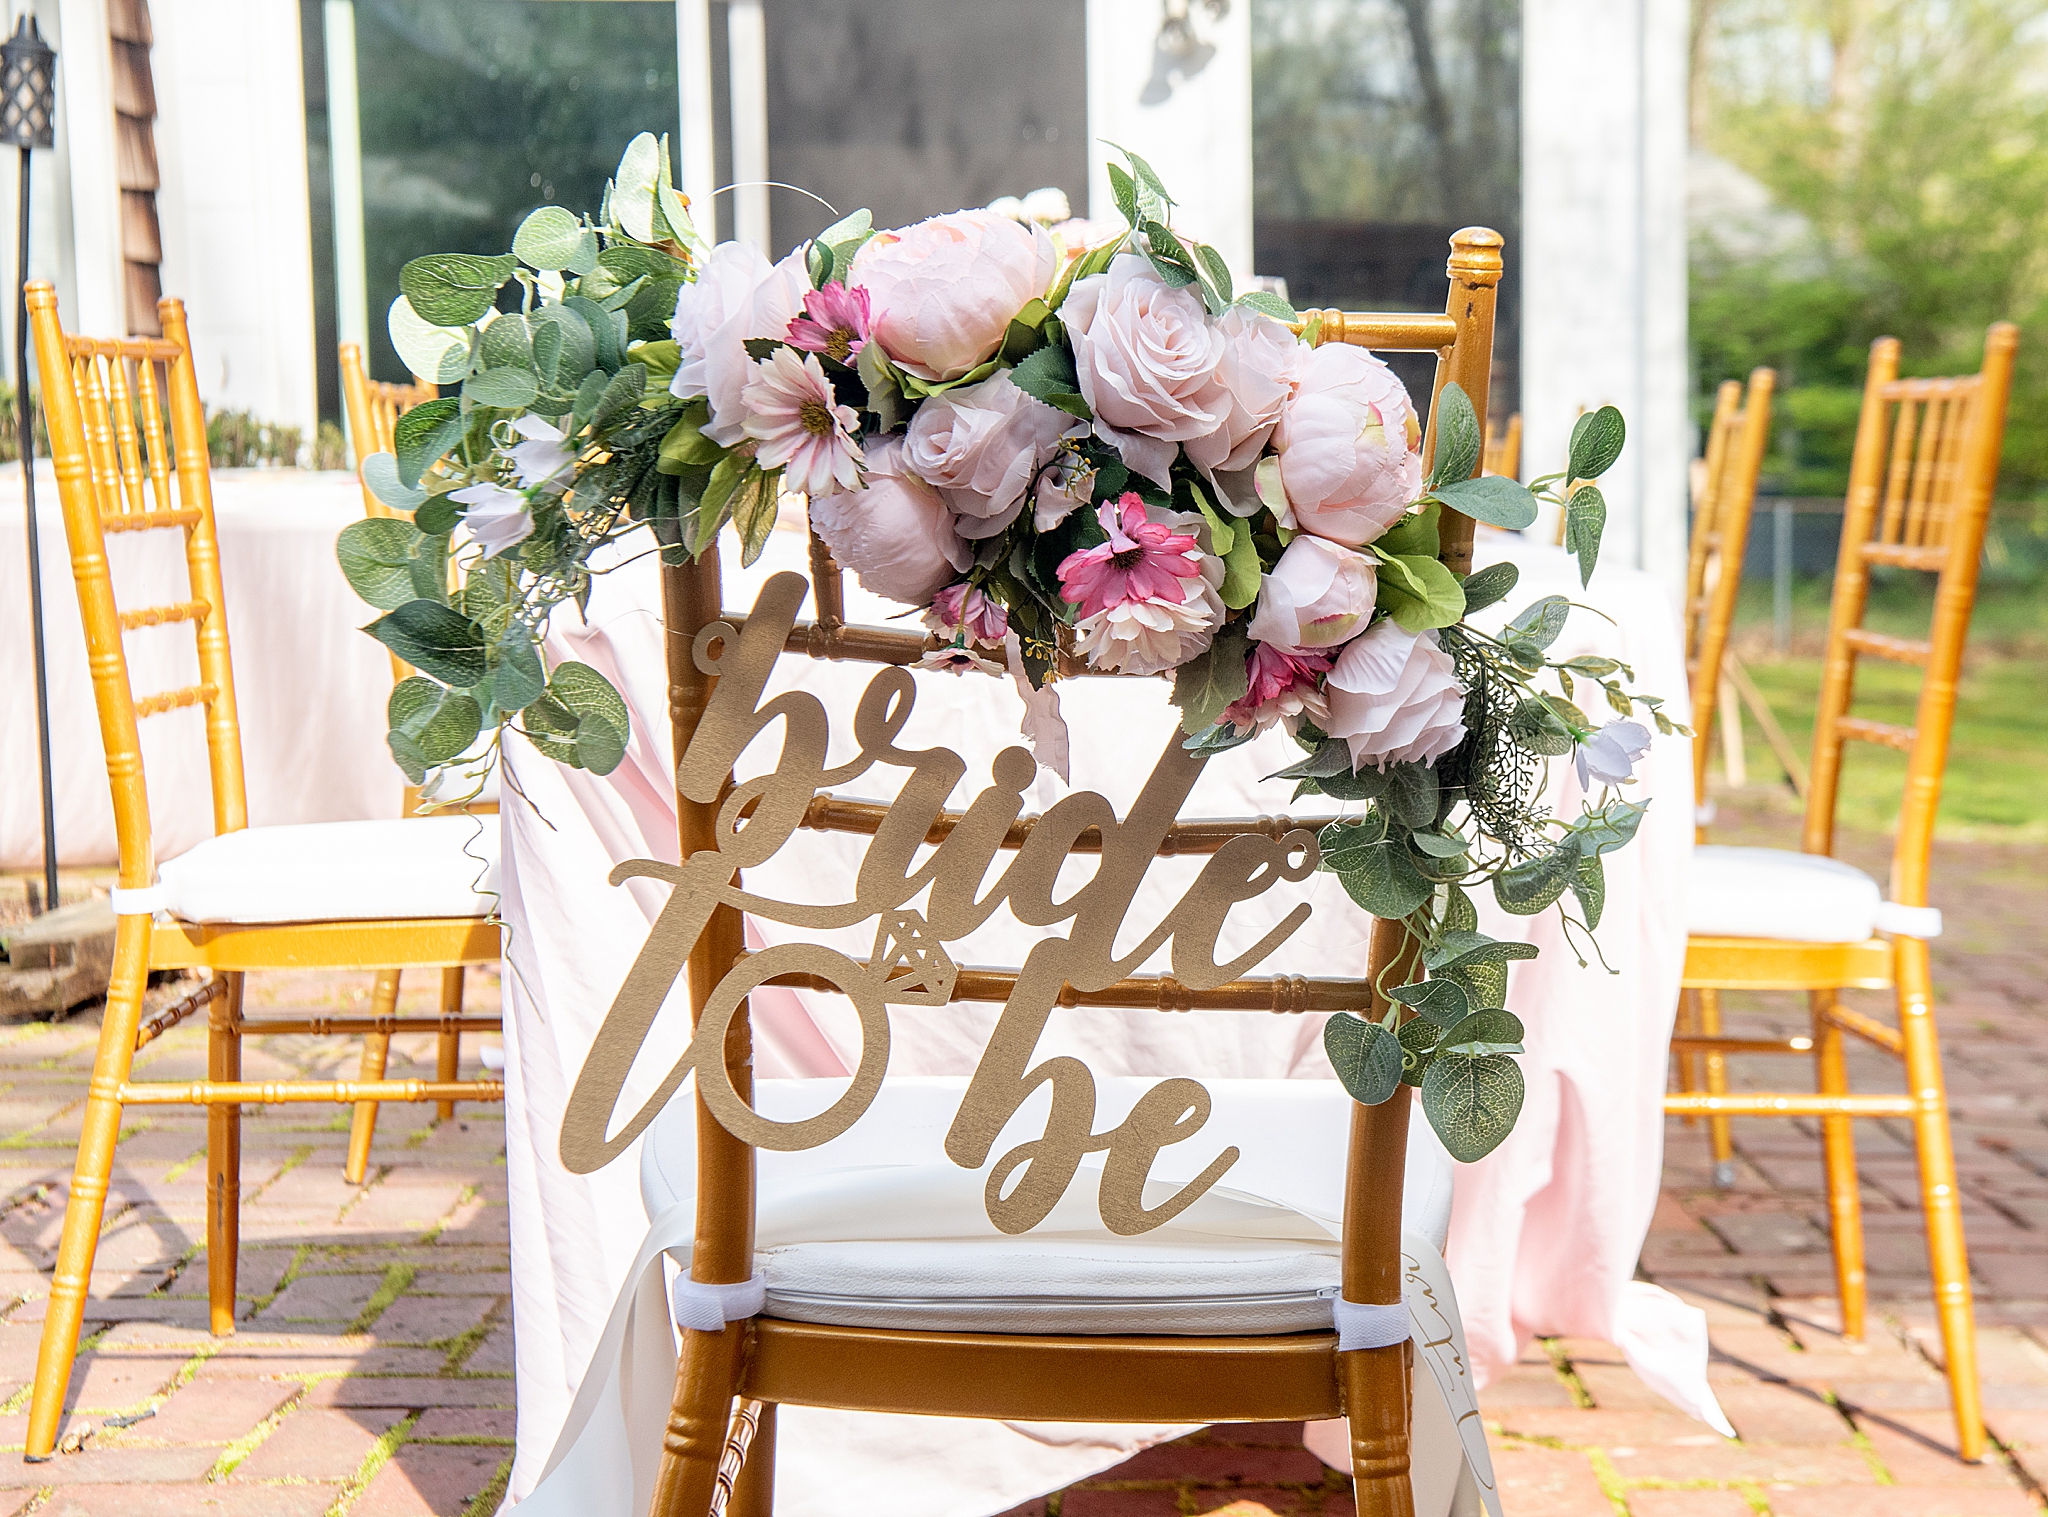 chair with bride to be sign and flowers